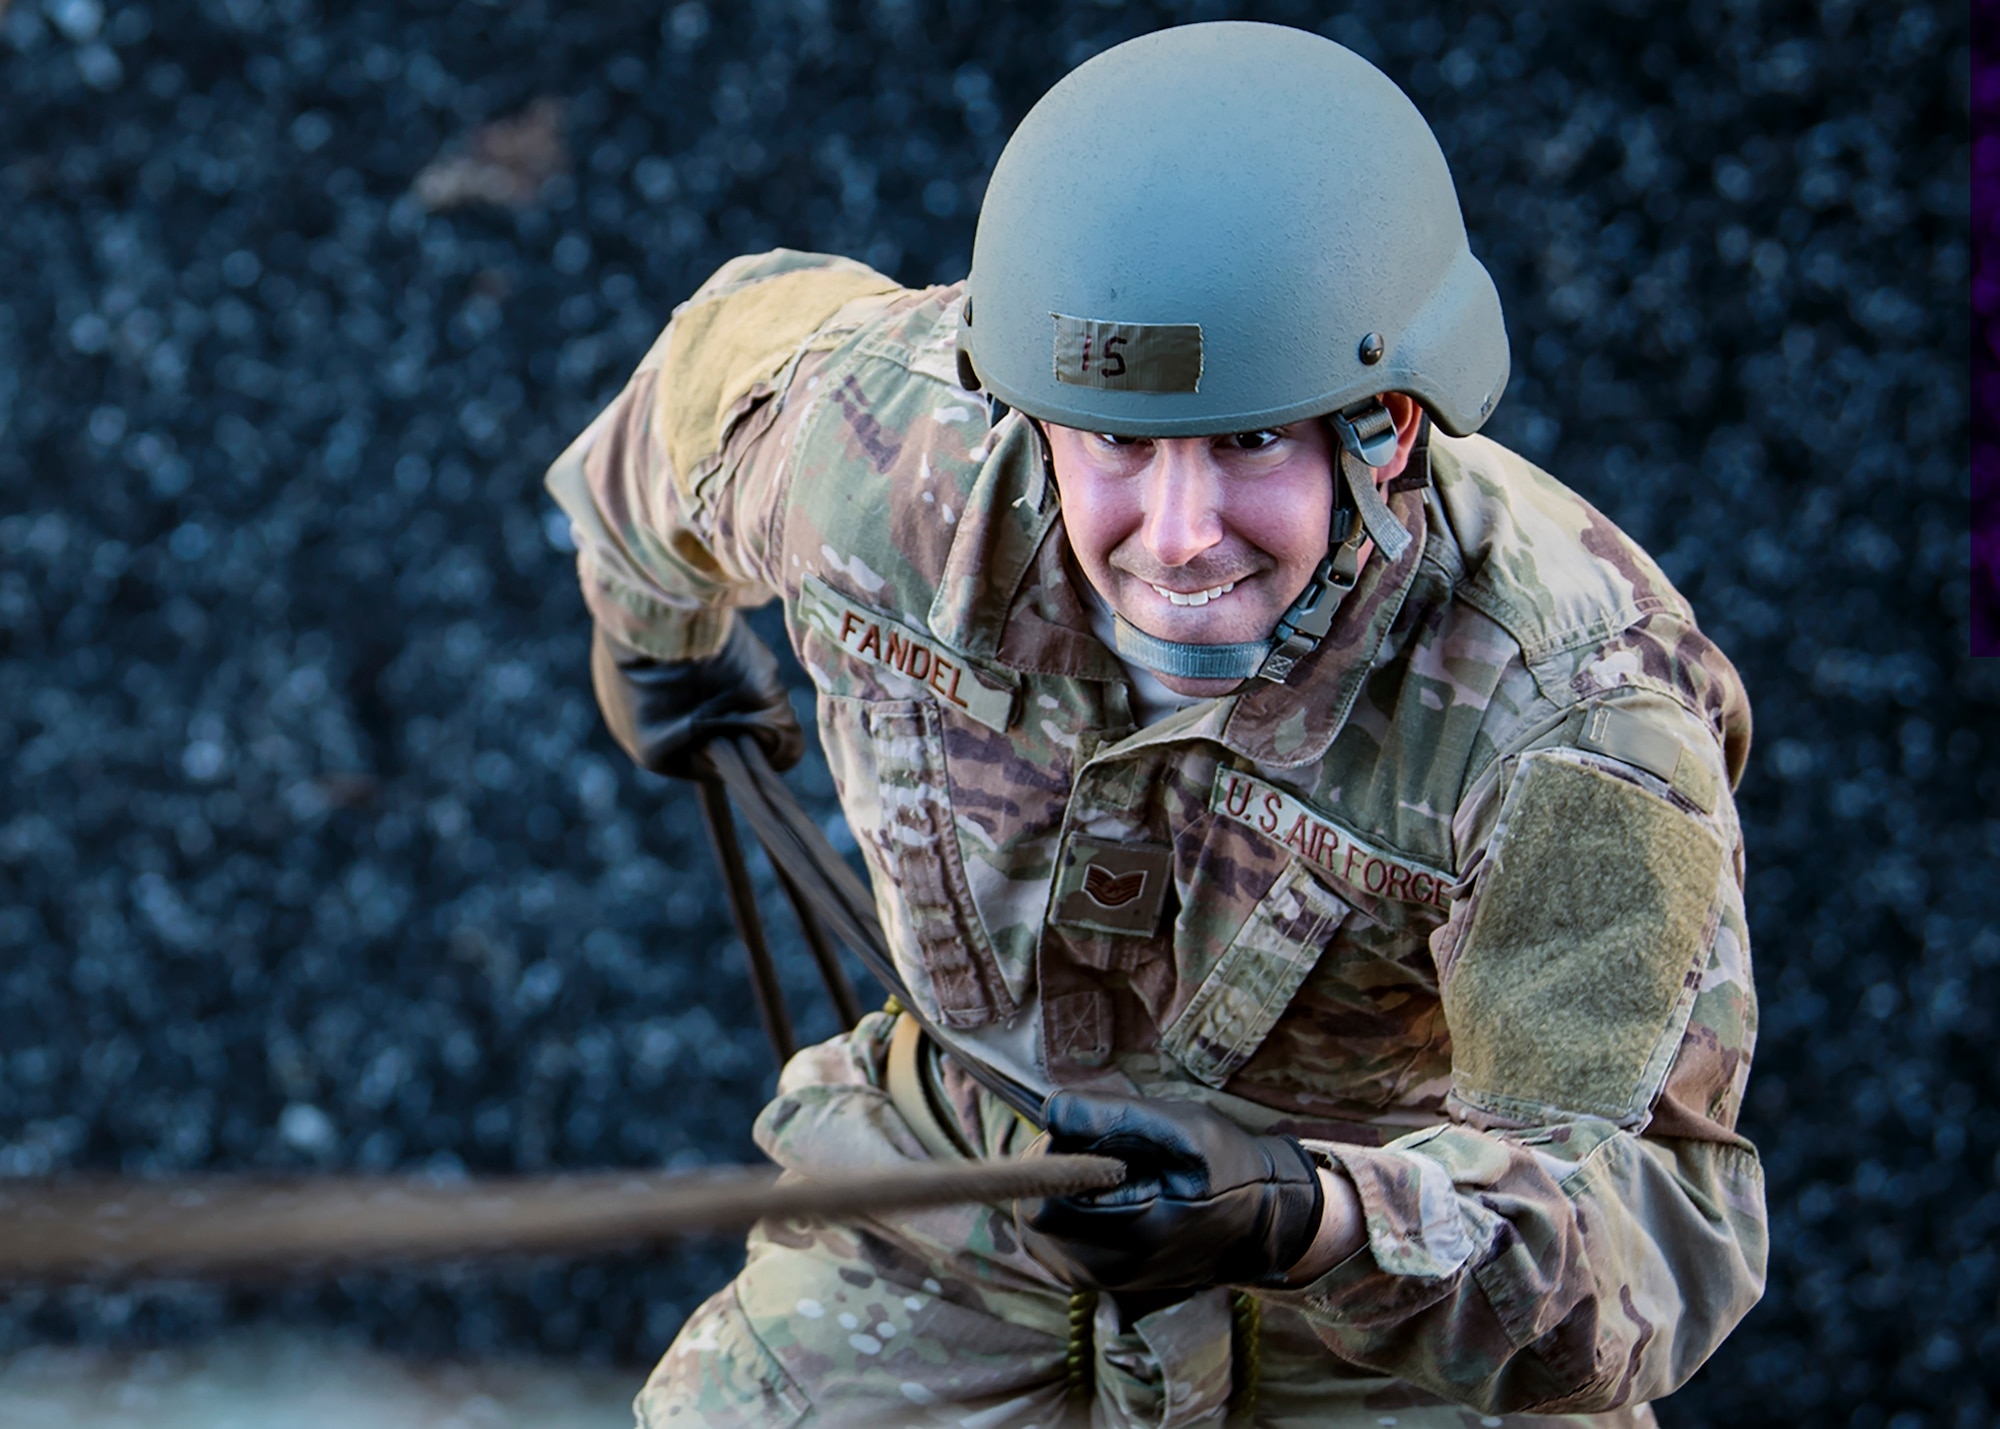 Tech Sgt. Daniel Fandel, 822d Base Defense Squadron squad leader, rappels down the Safeside Rappel Tower during an Army Air Assault Assessment (AAA), Jan. 28, 2019, at Moody Air Force Base, Ga. The AAA is designed to determine Airmen’s physical and mental readiness before being able to attend Army Air Assault school. (U.S. Air Force photo by Airman First Class Eugene Oliver)